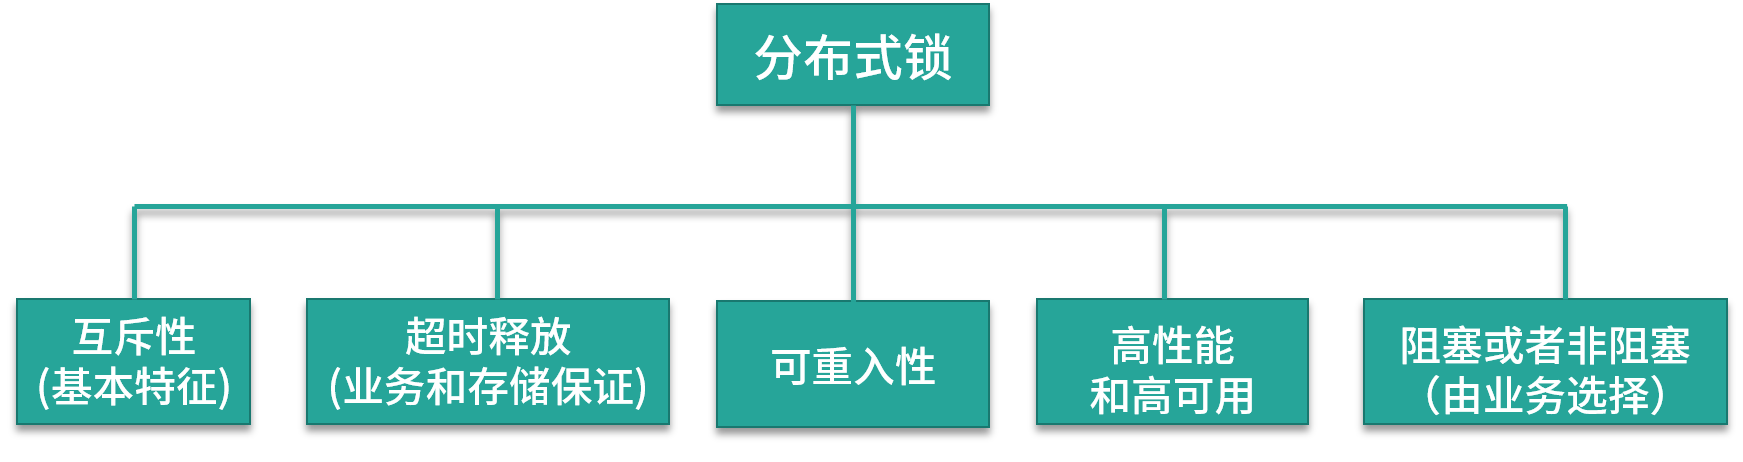 <span style='color:red;'>如何</span>使用 <span style='color:red;'>Redis</span> 快速实现<span style='color:red;'>分布式</span><span style='color:red;'>锁</span>？